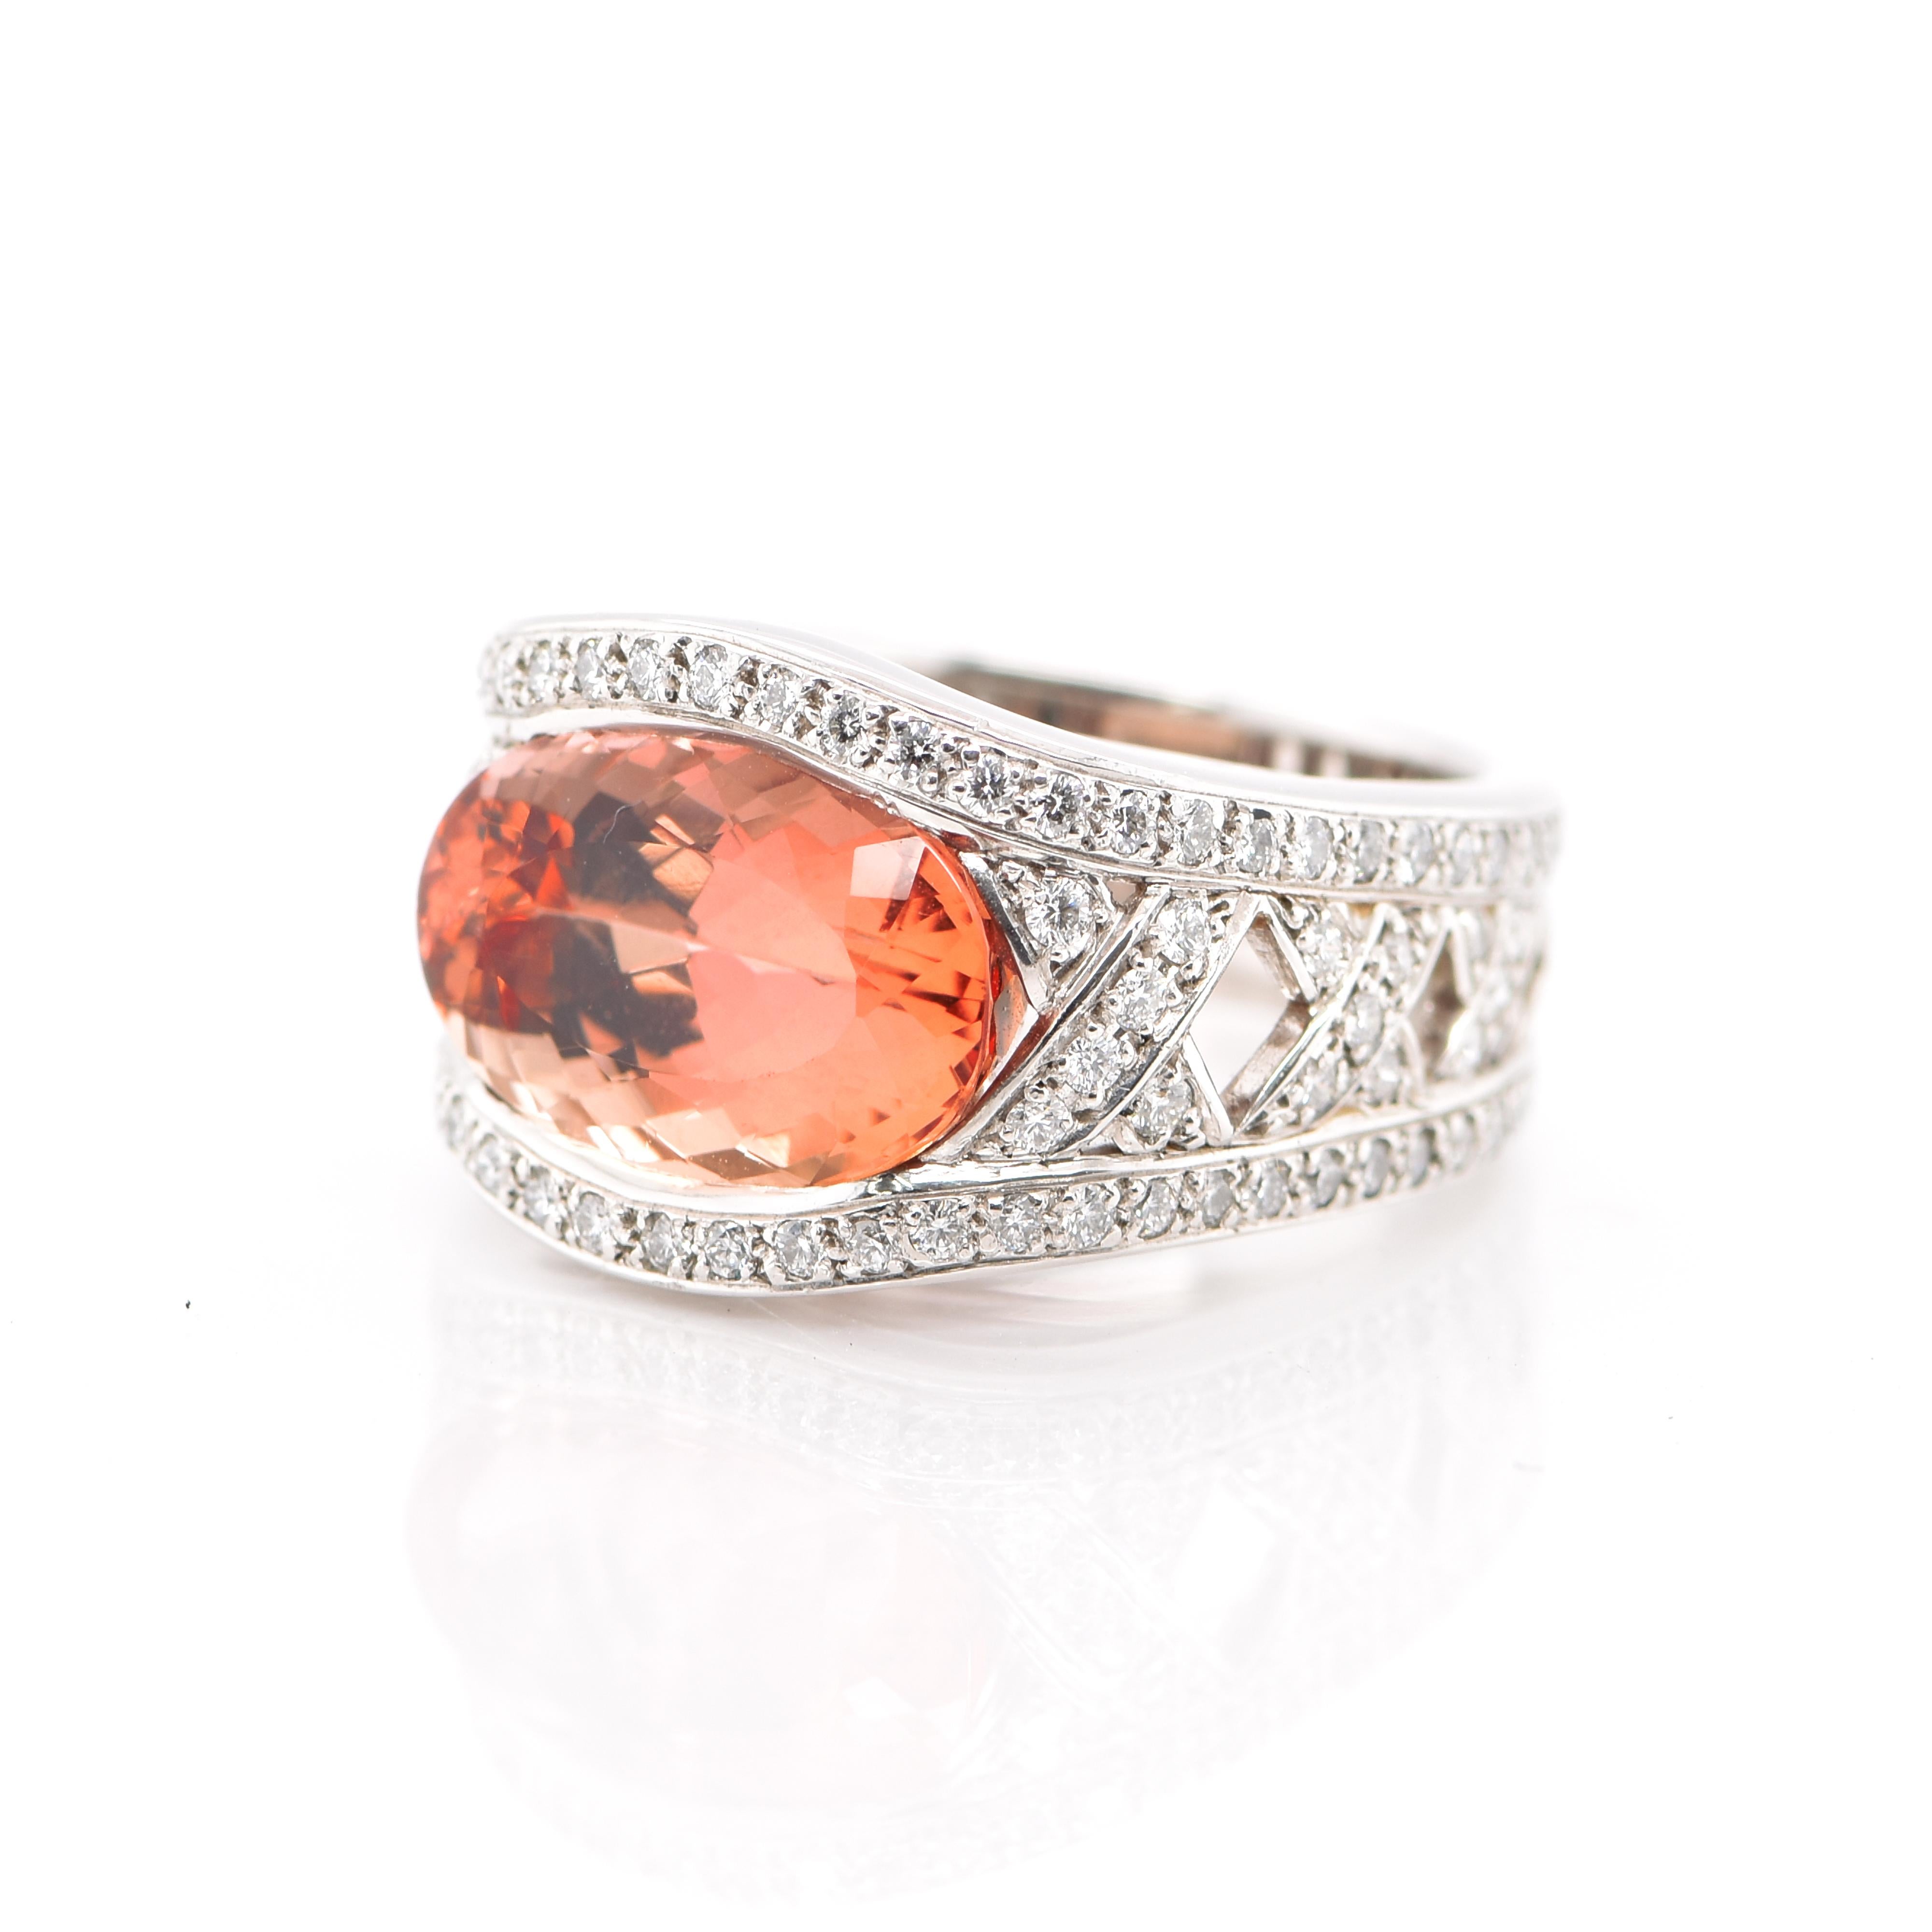 Modern 6.38 Carat Imperial Topaz and Diamond Cocktail Ring Set in Platinum